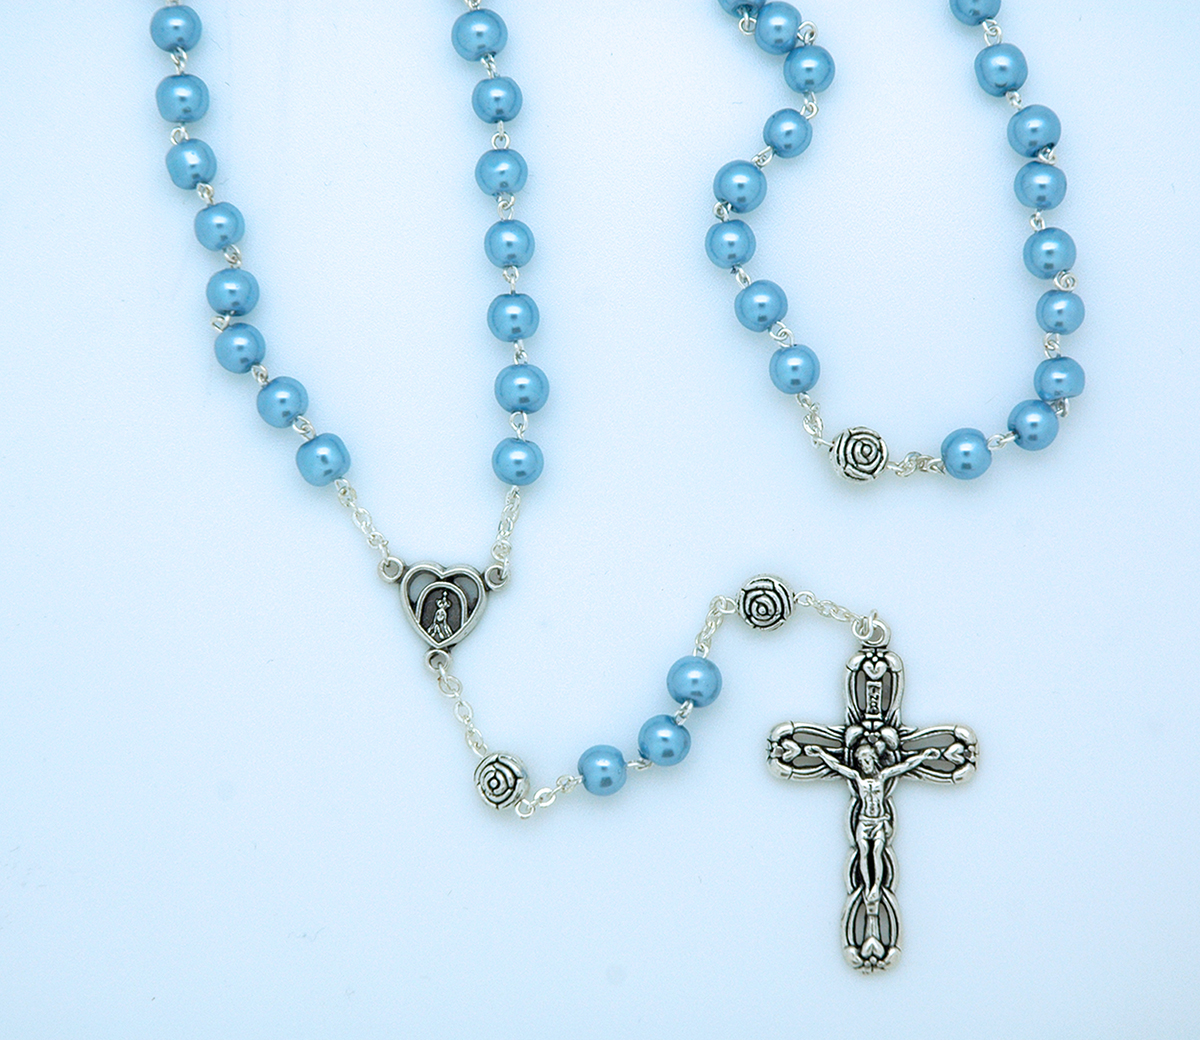 P402B - 6 mm. Glass Pearl Rosary from Fatima, Silver Rose Our Father Beads, Blue